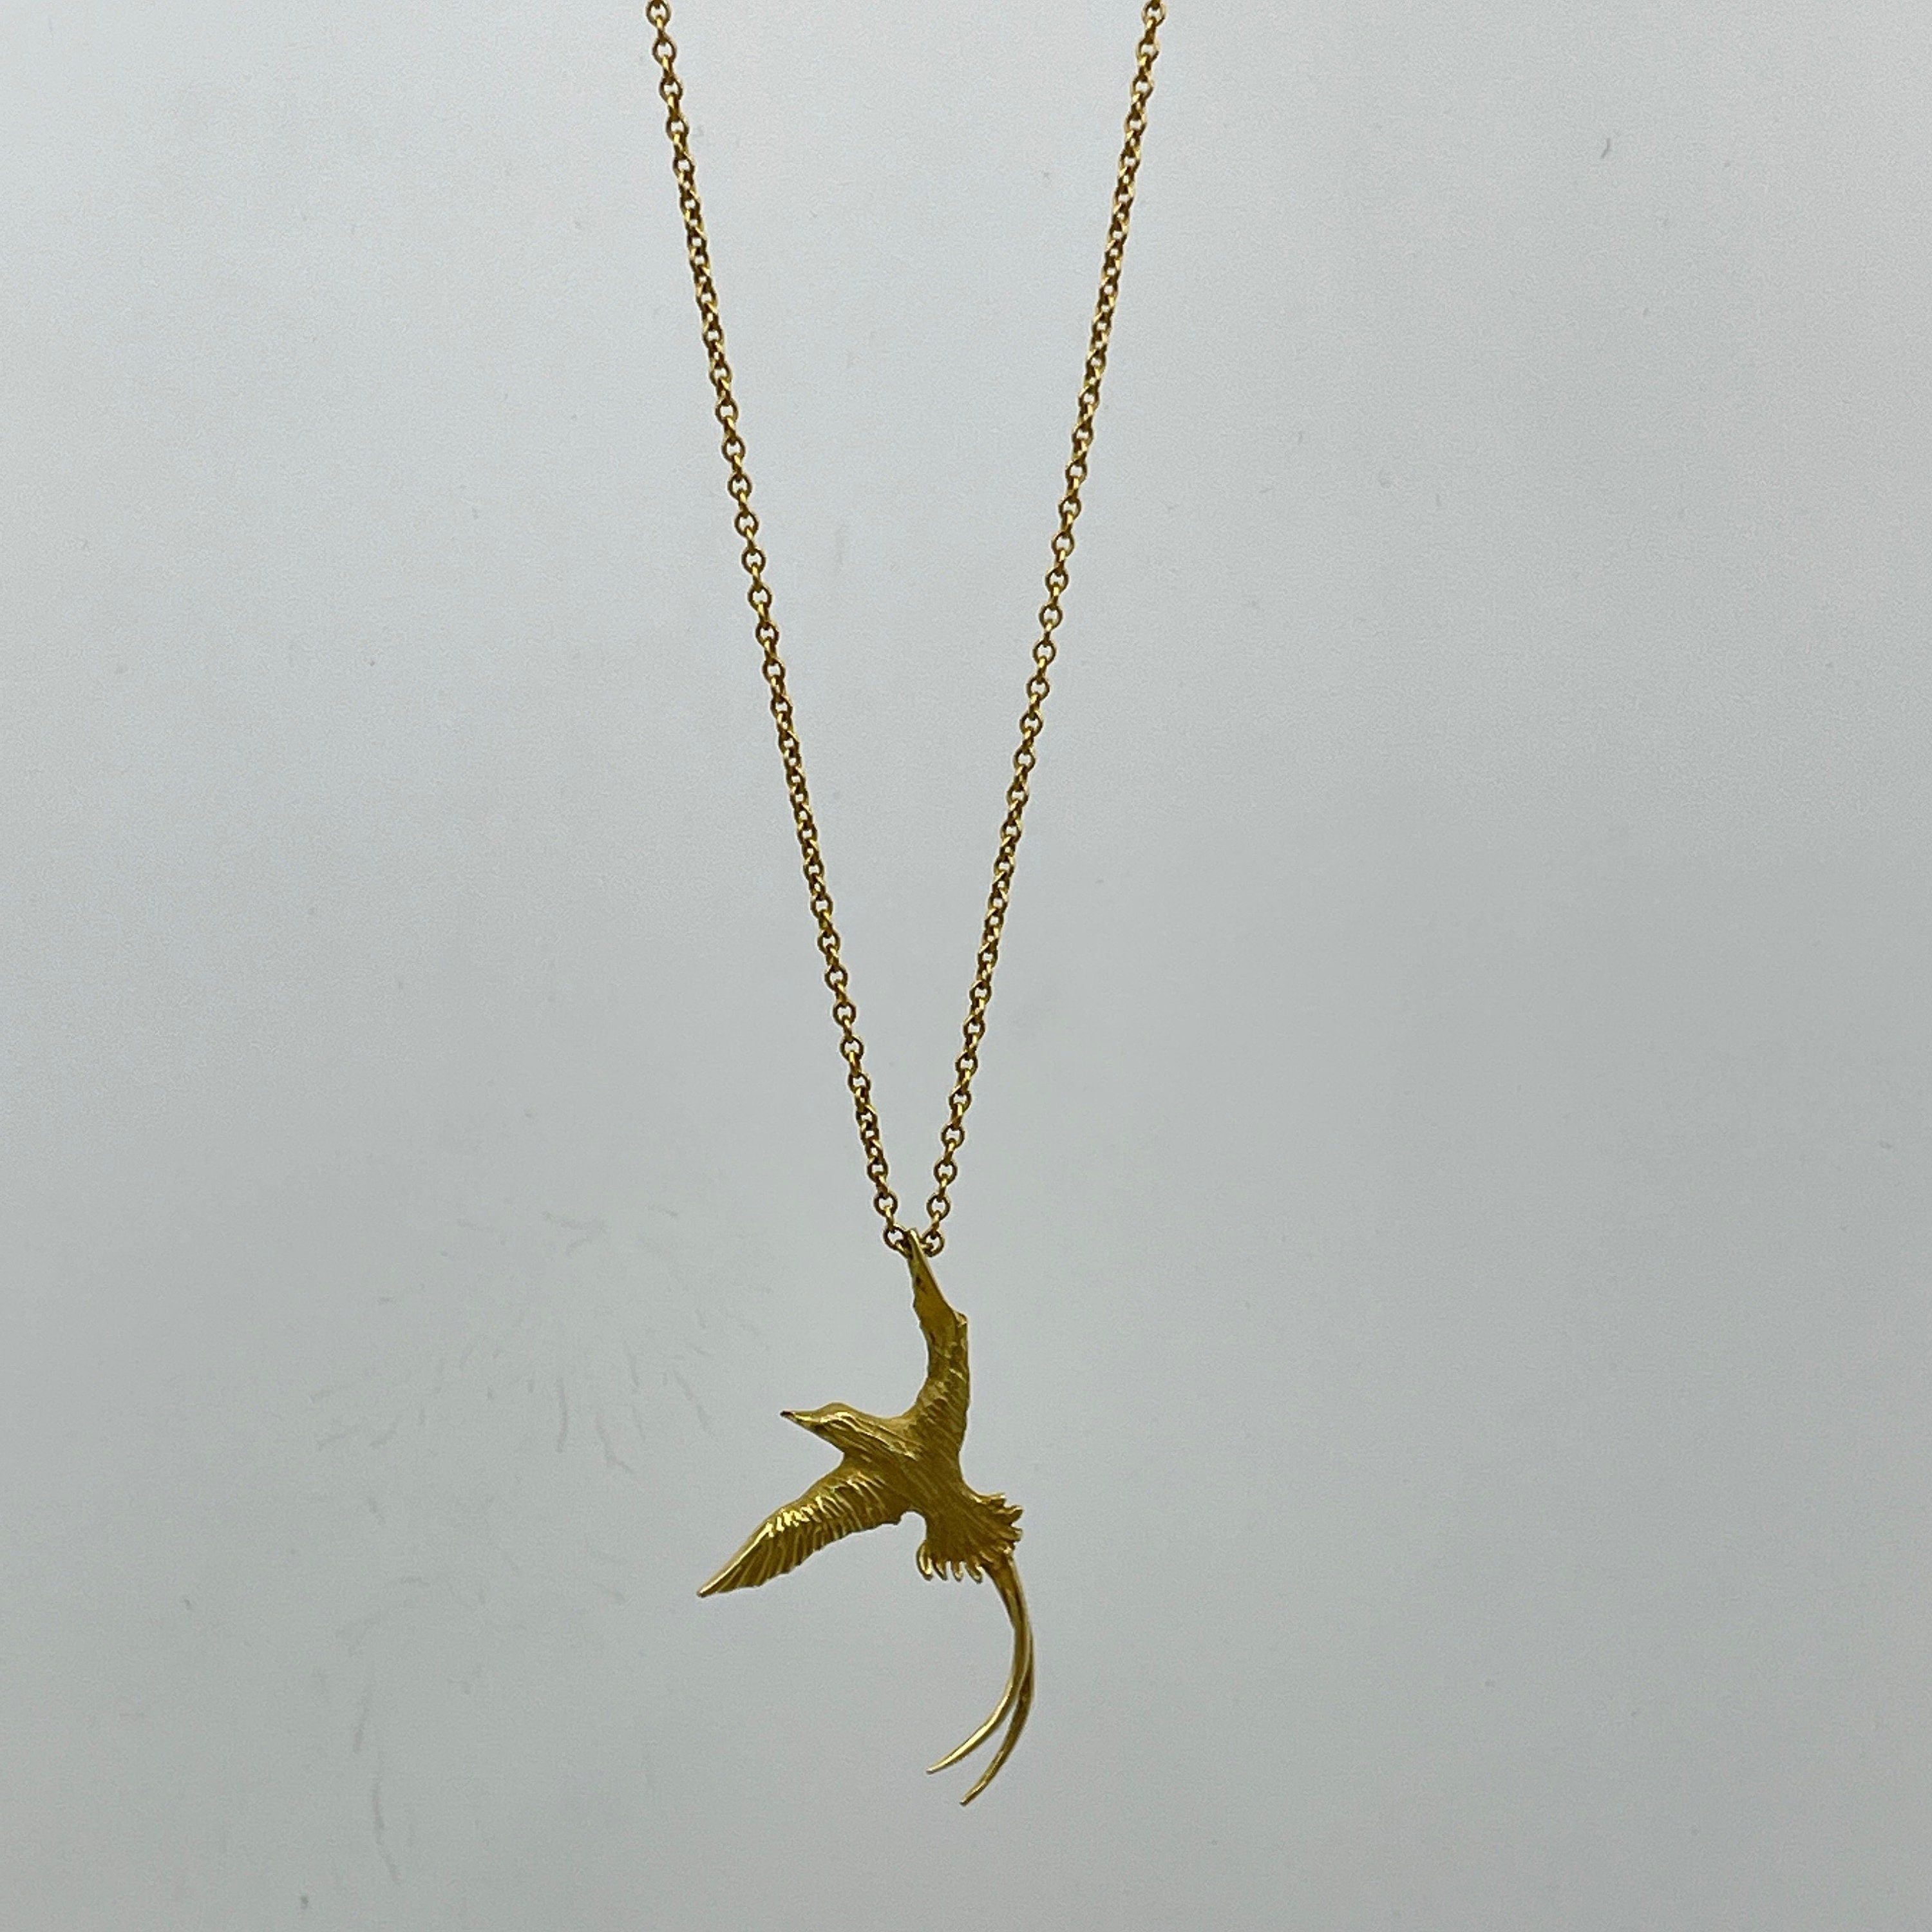 Vintage 18ct Gold bird of paradise pendant on 9ct Gold chain necklace